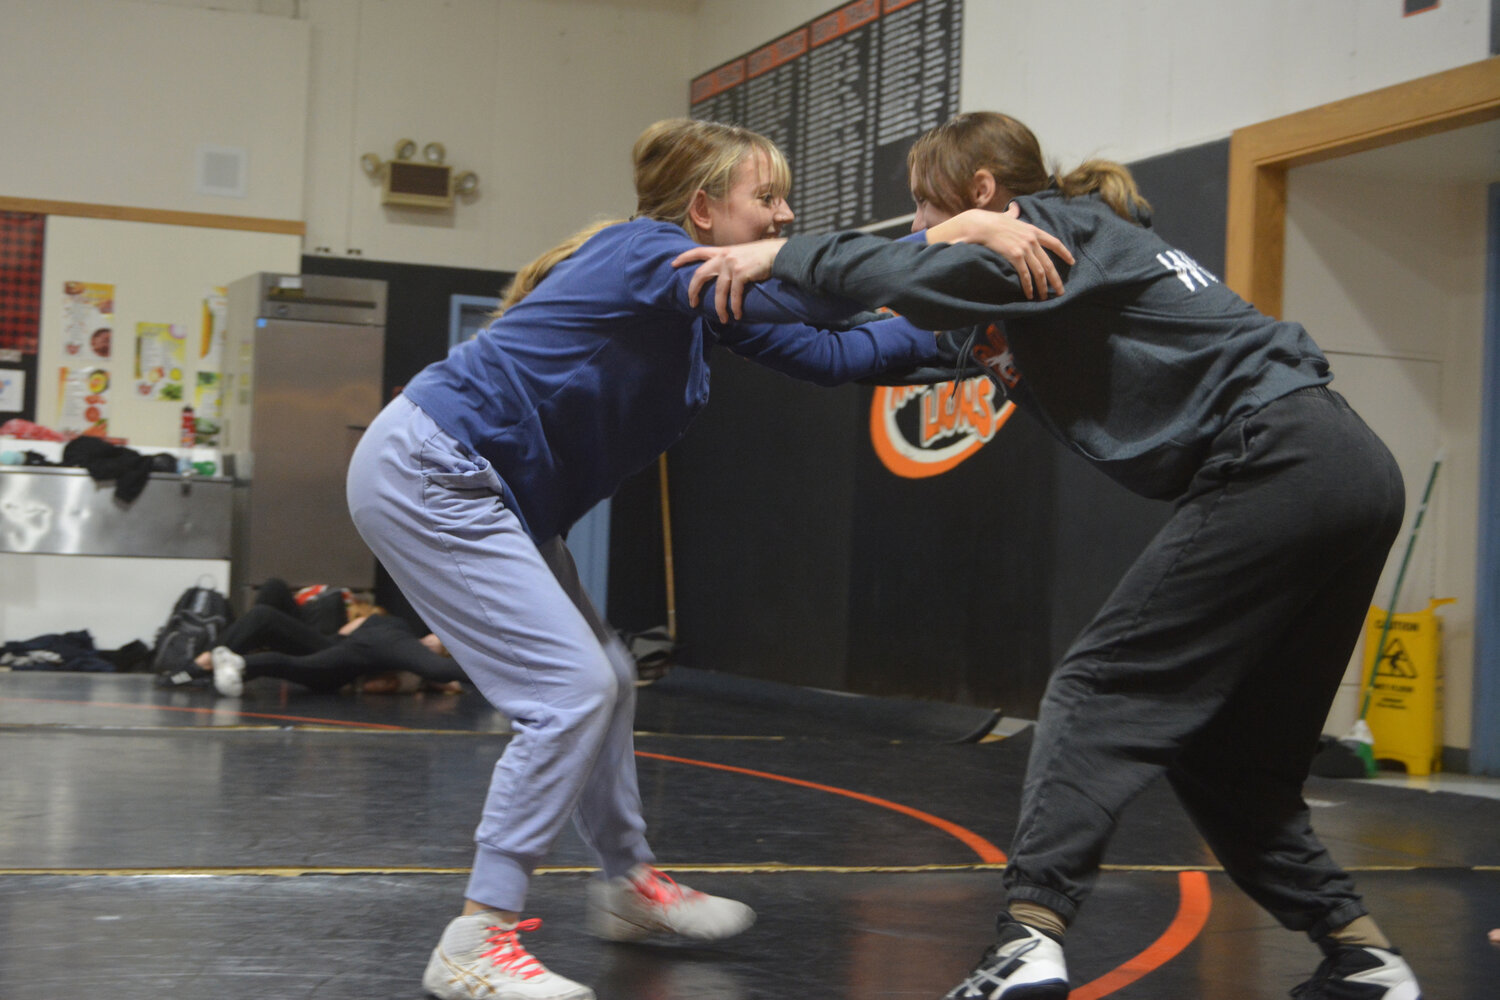 Skye Dale and Maddi Worthy prepare to wrestle during practice on Nov. 30.